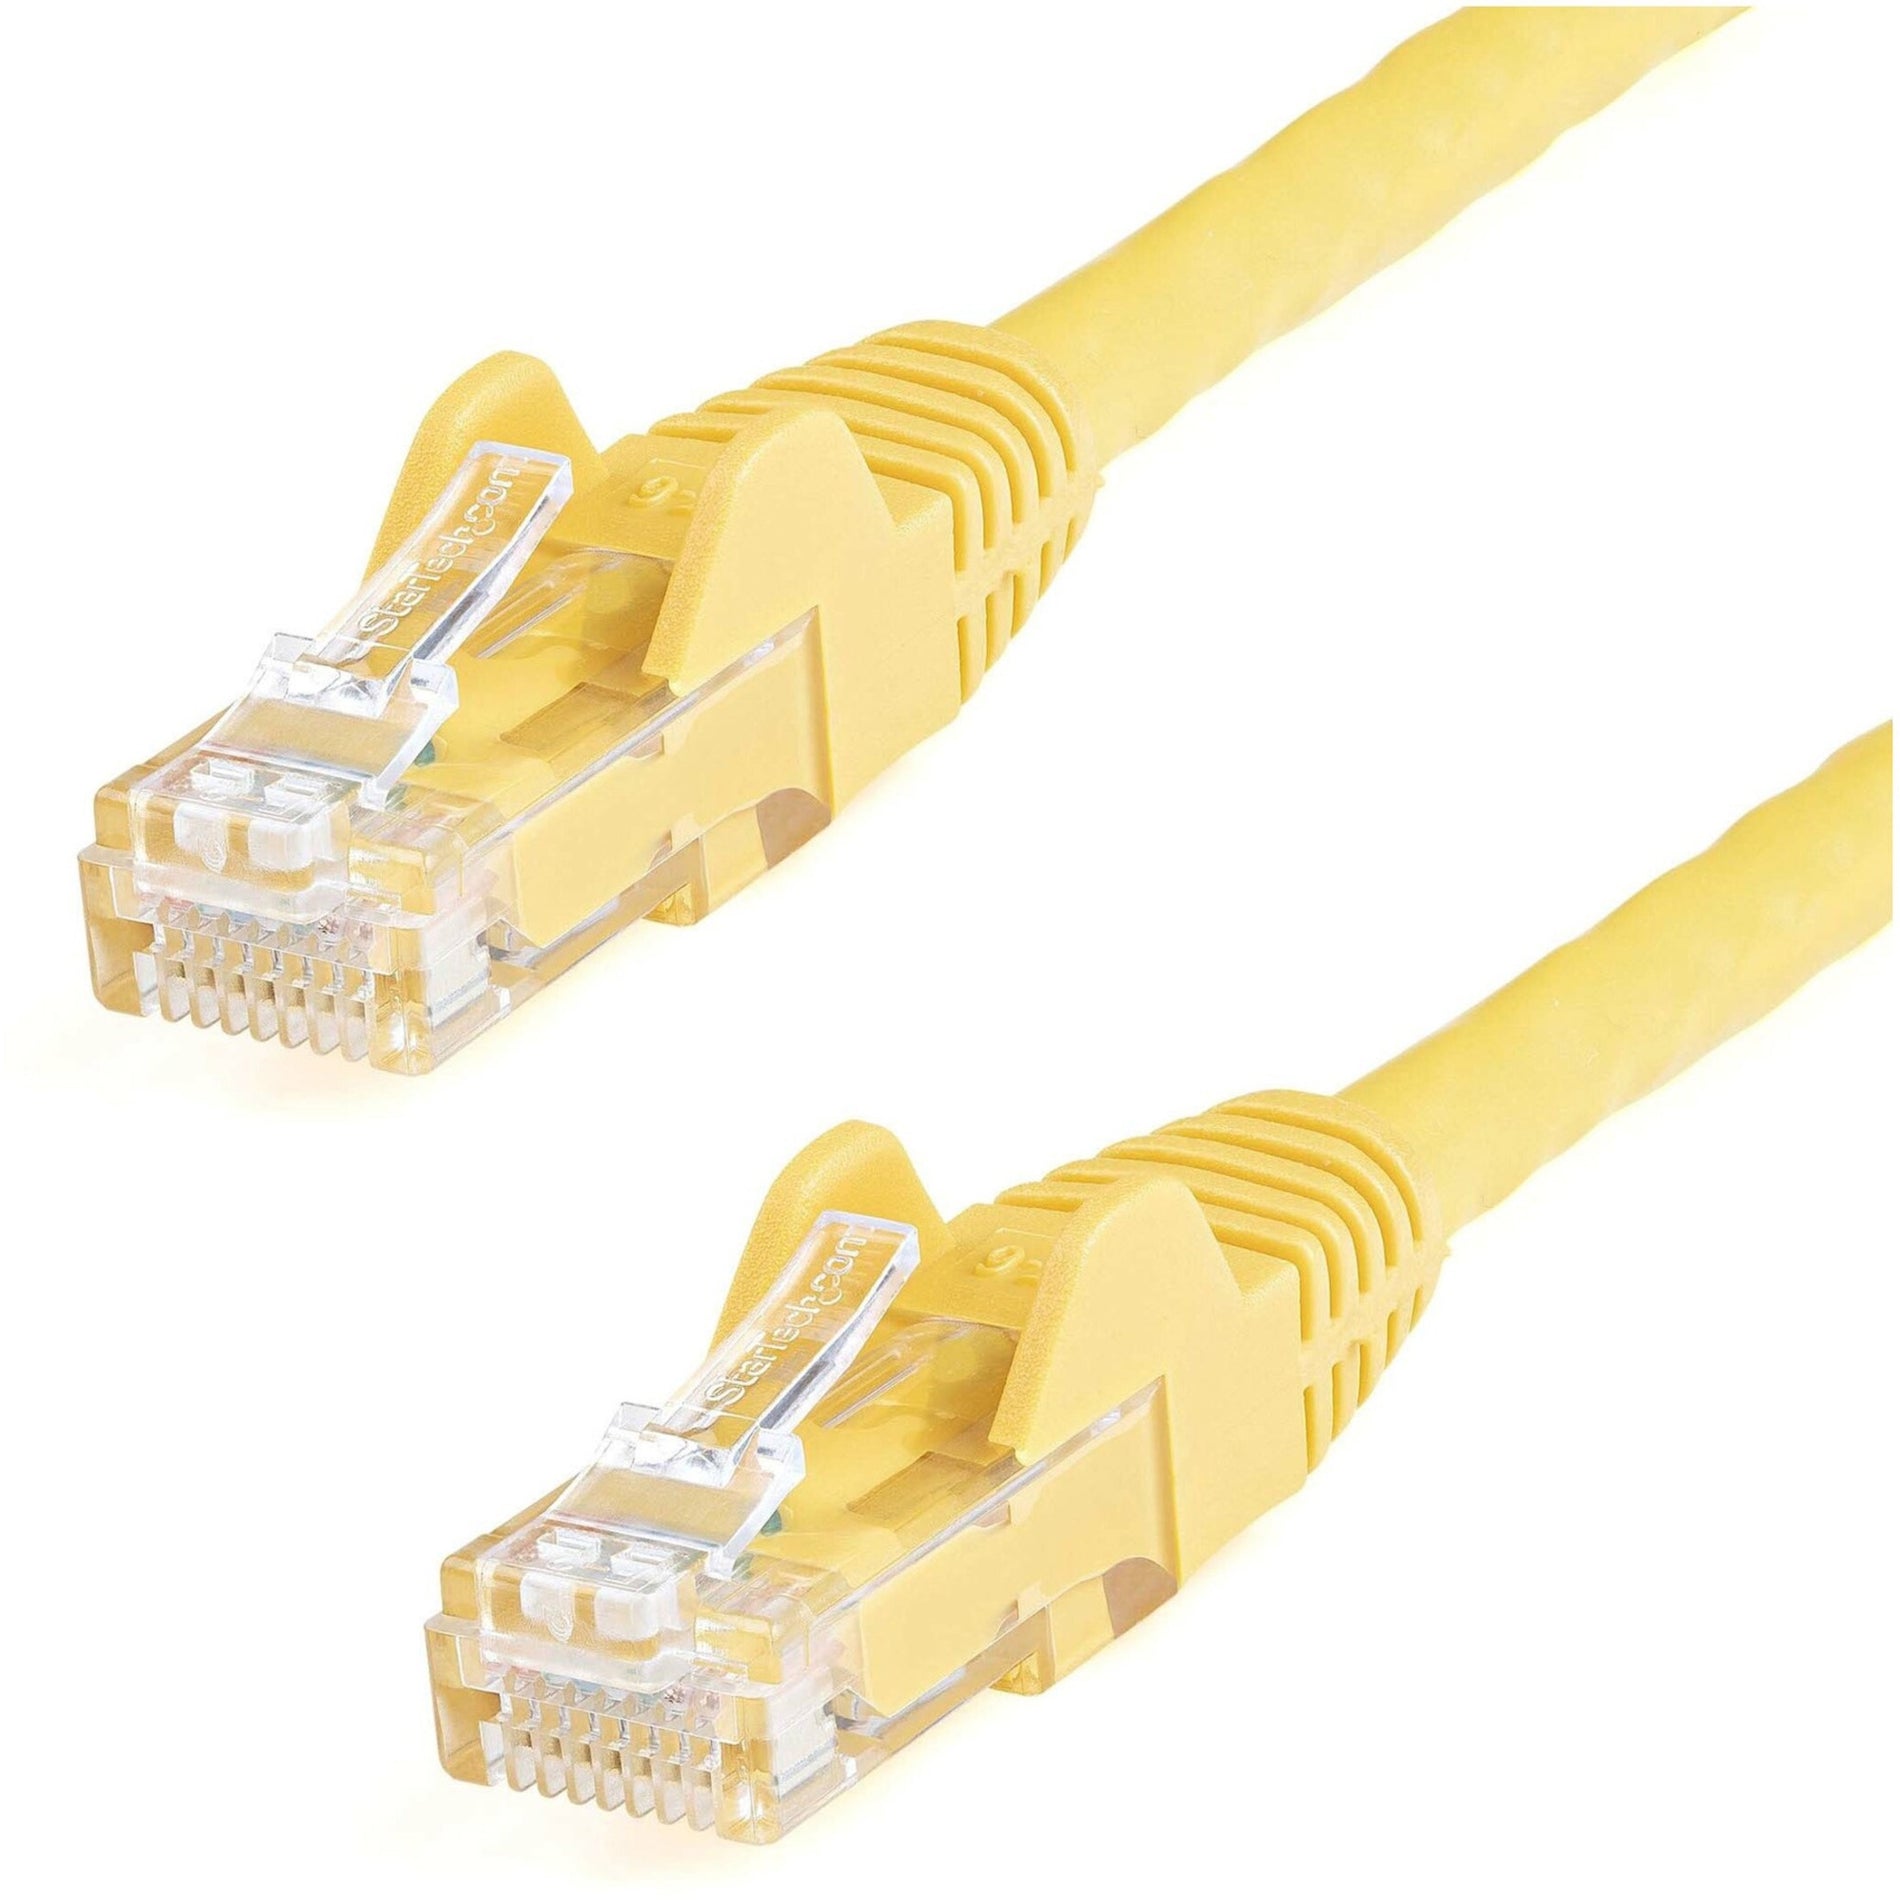 StarTech.com N6PATCH14YL Cat6 Patch Cable, 14ft Yellow Ethernet Cable, Snagless RJ45 Connectors